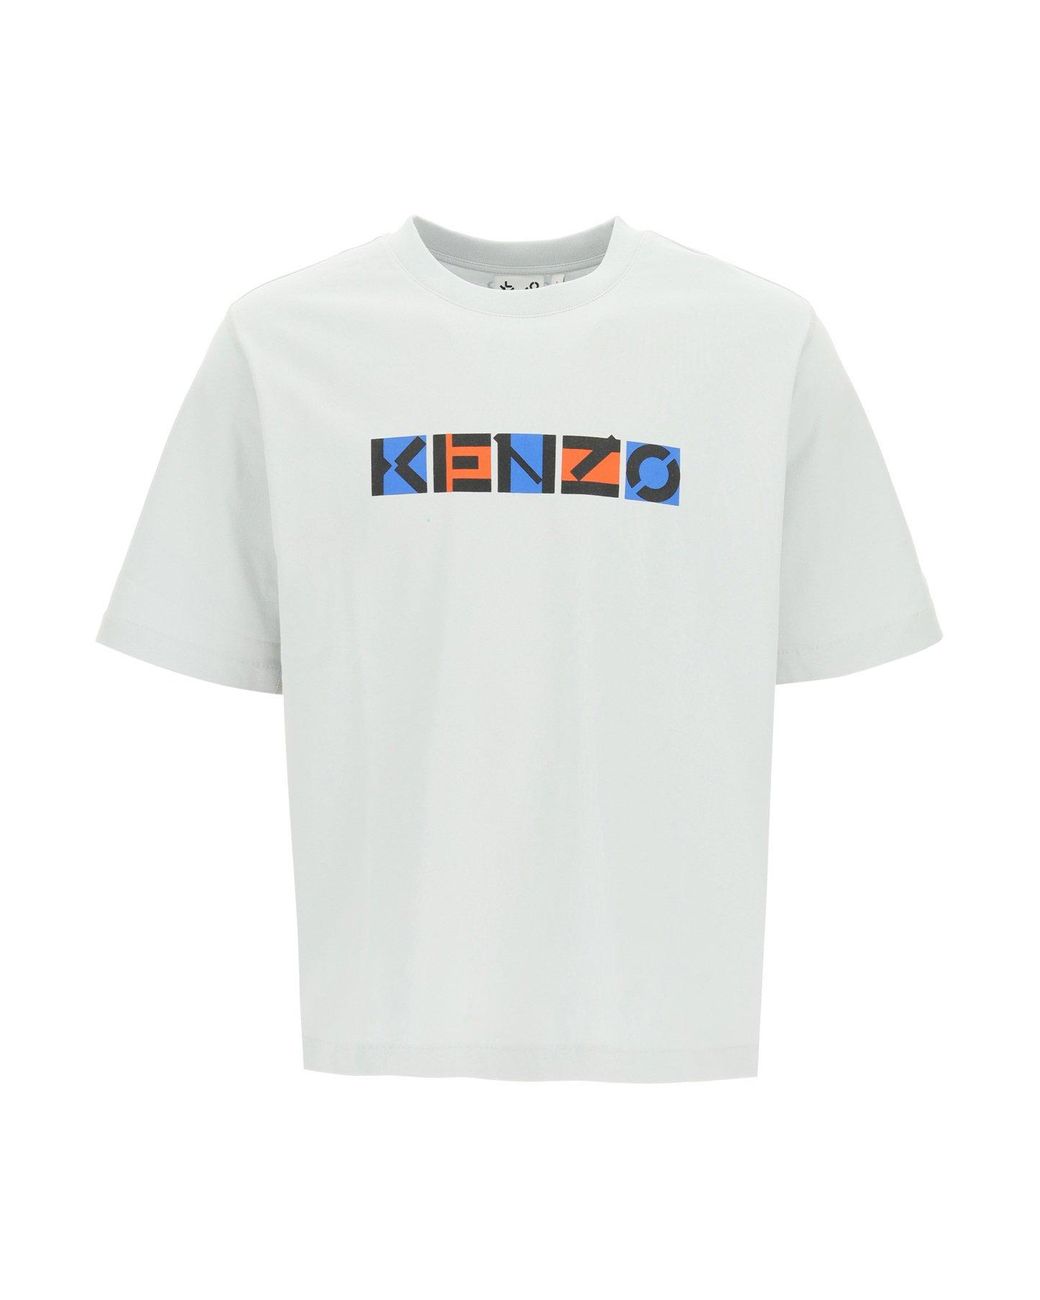 KENZO Cotton Sport Loose T-shirt in Grey (Gray) for Men - Save 29% - Lyst